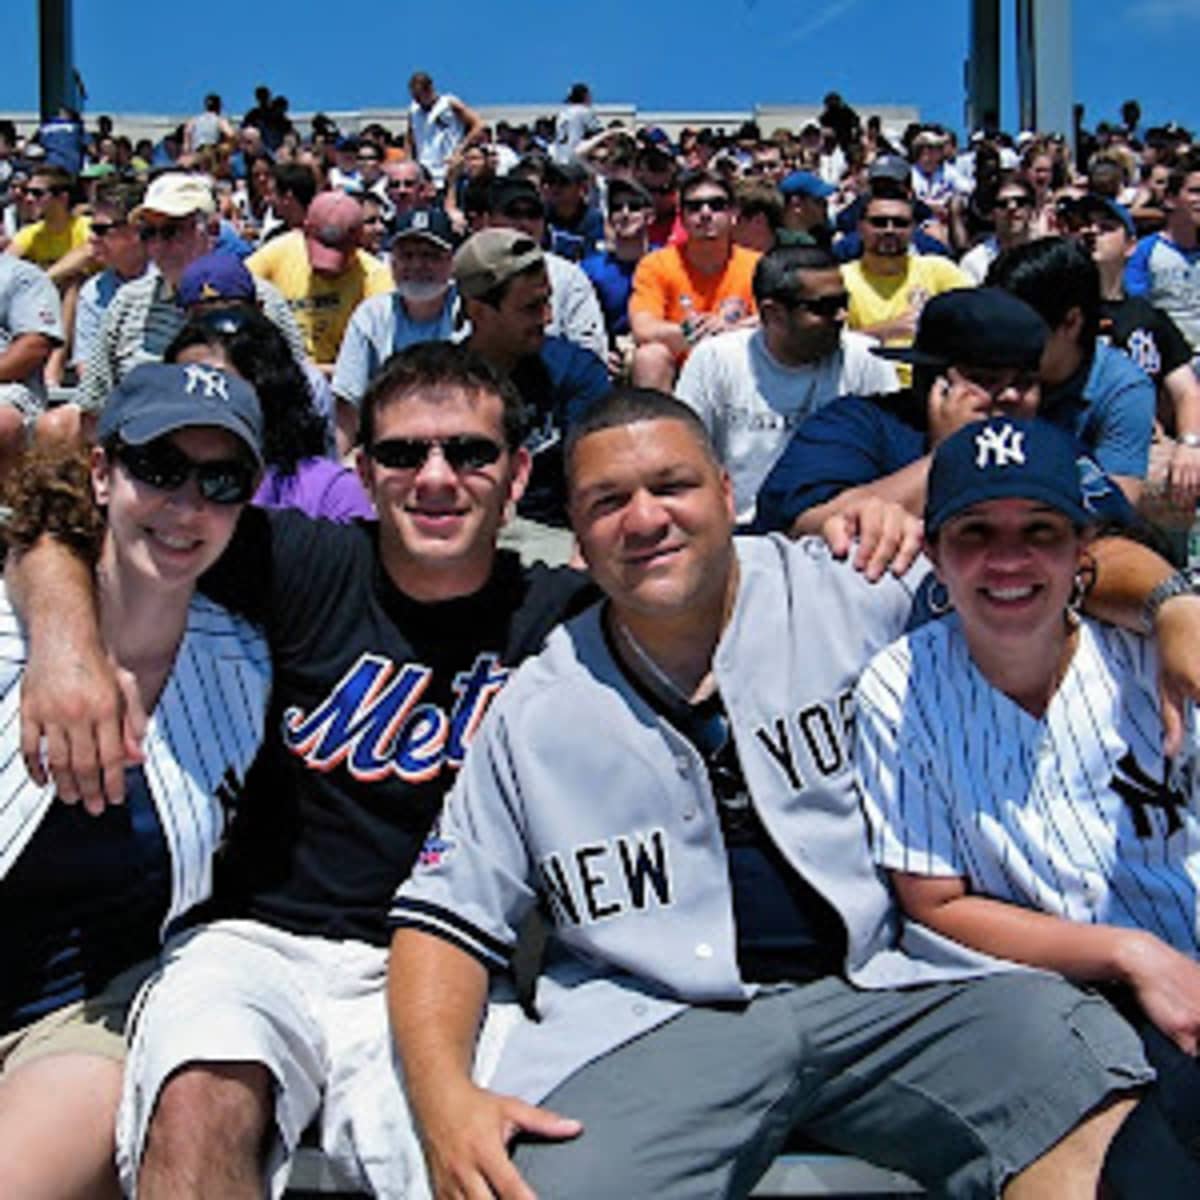 Mets & Yankee Fans Come Together to Cheer on Their teams in the